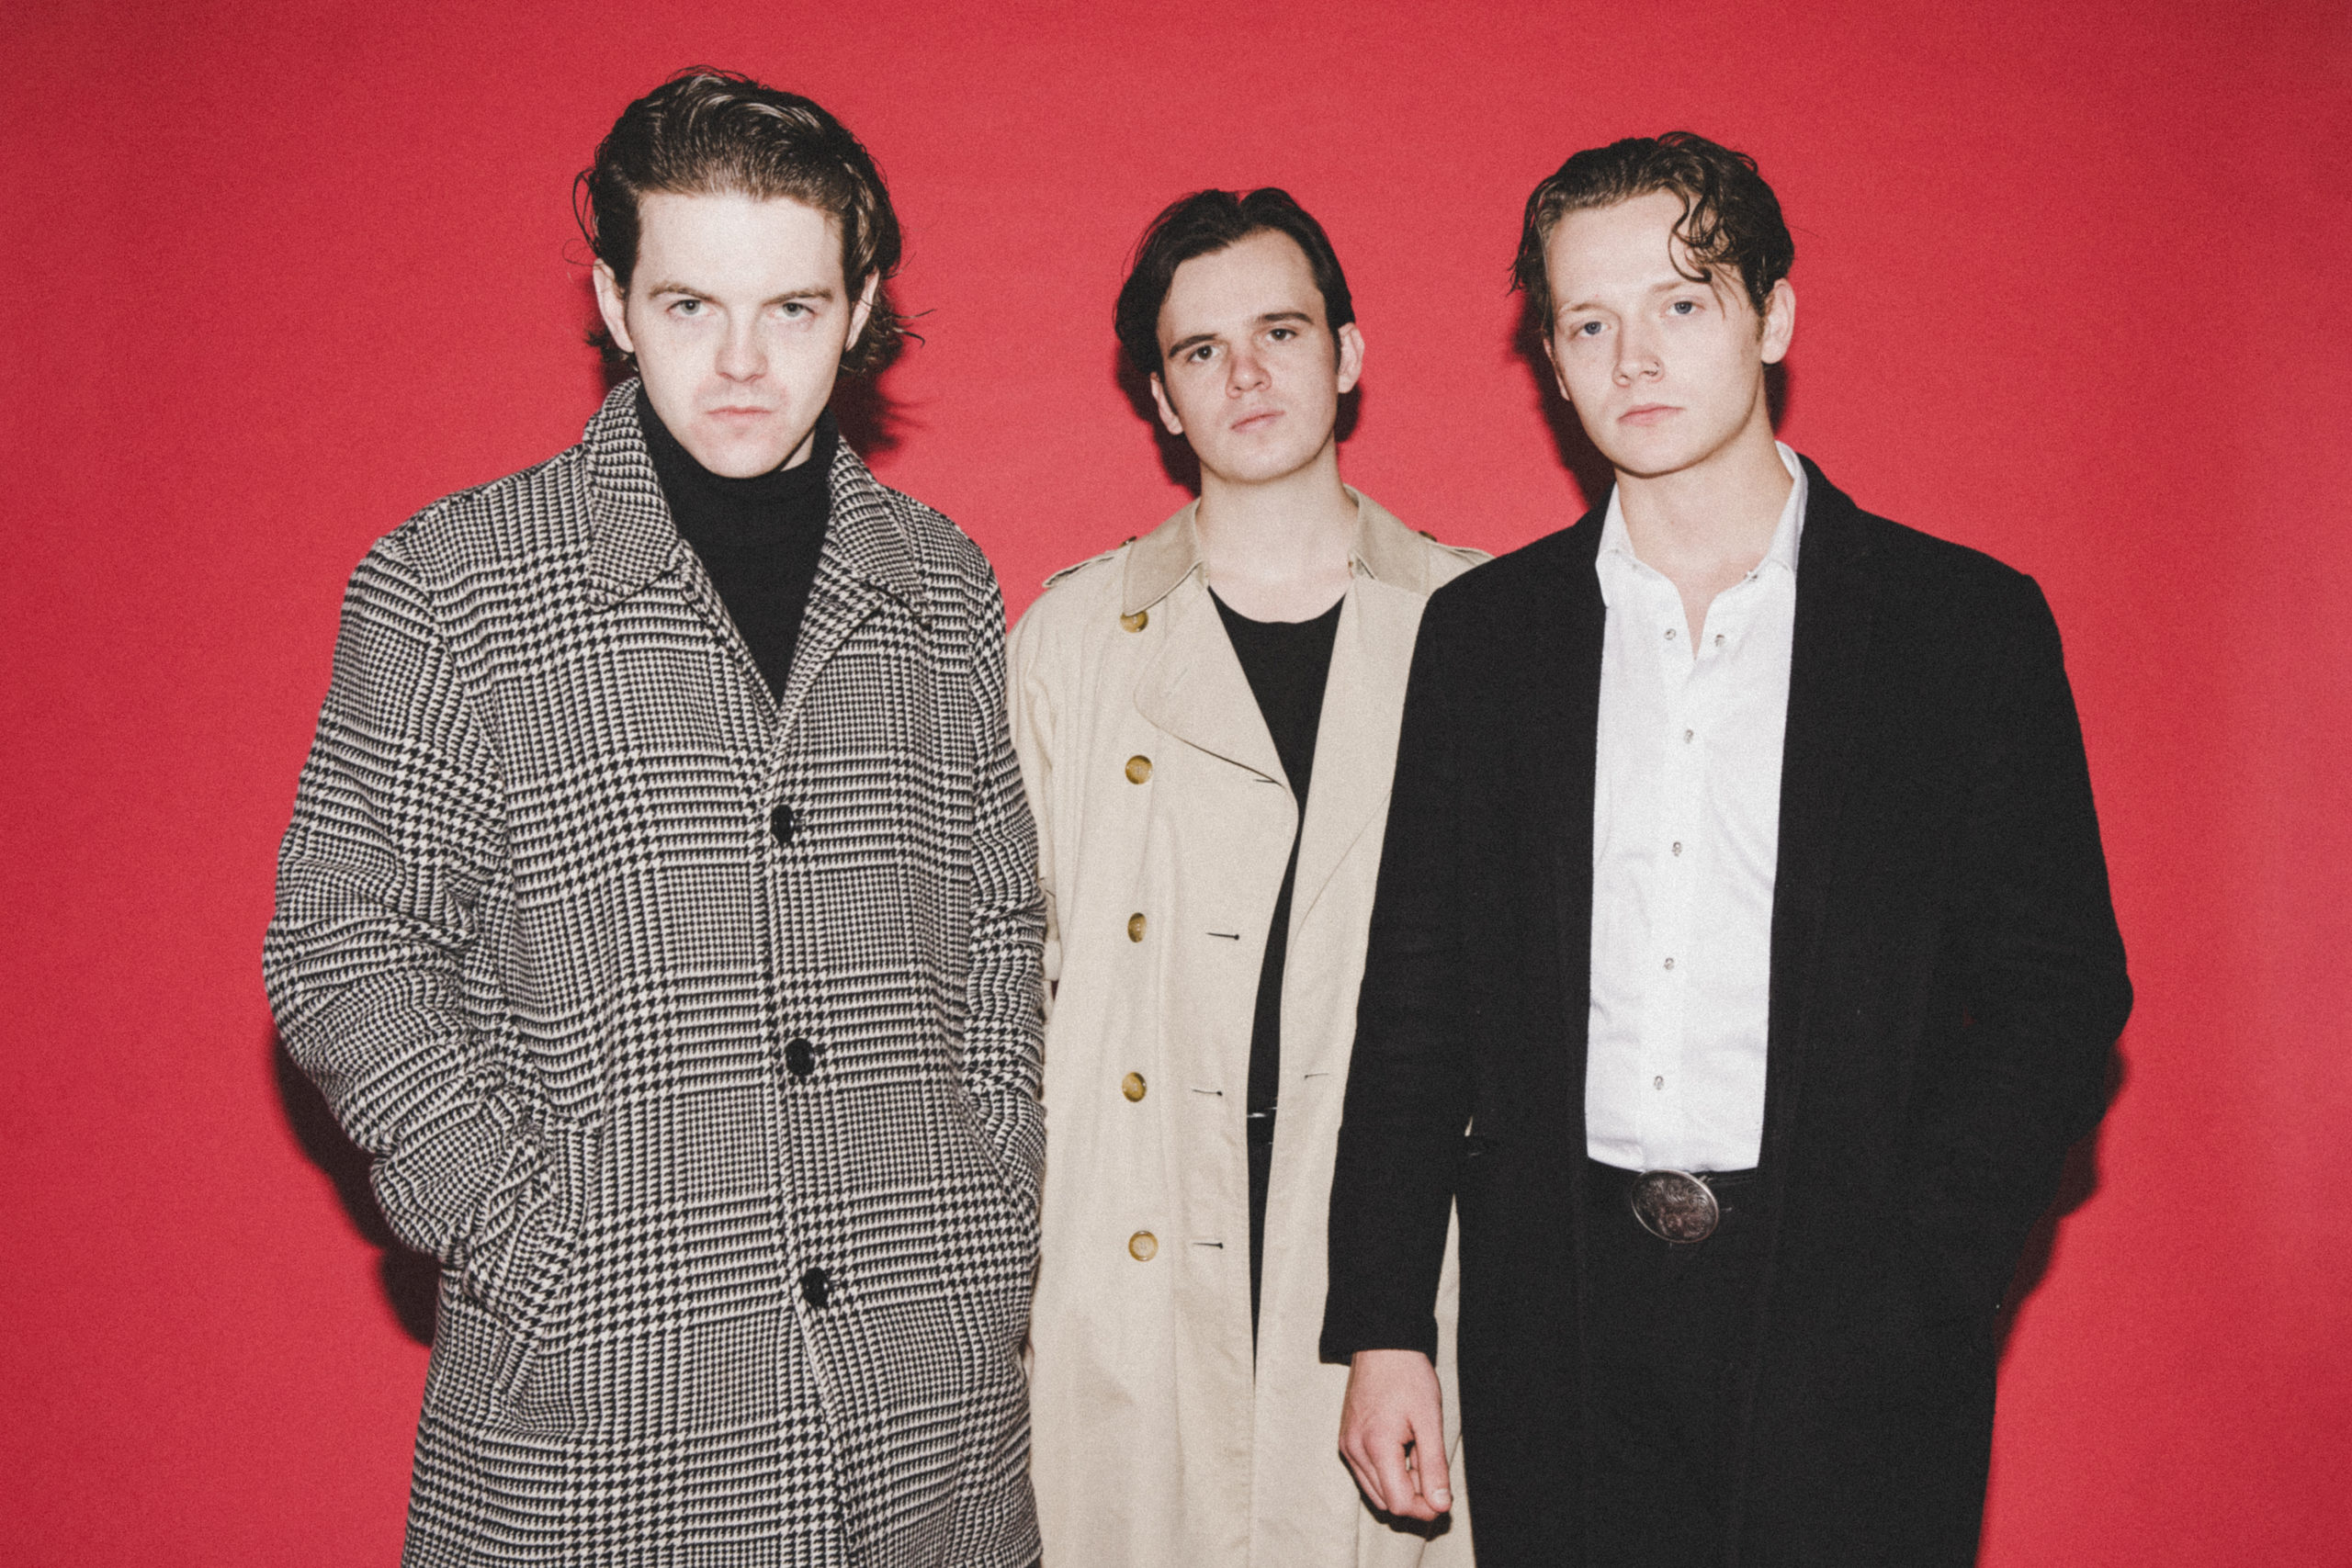  The Blinders interview: “the best gigs make you feel like you’re the only person in the room”